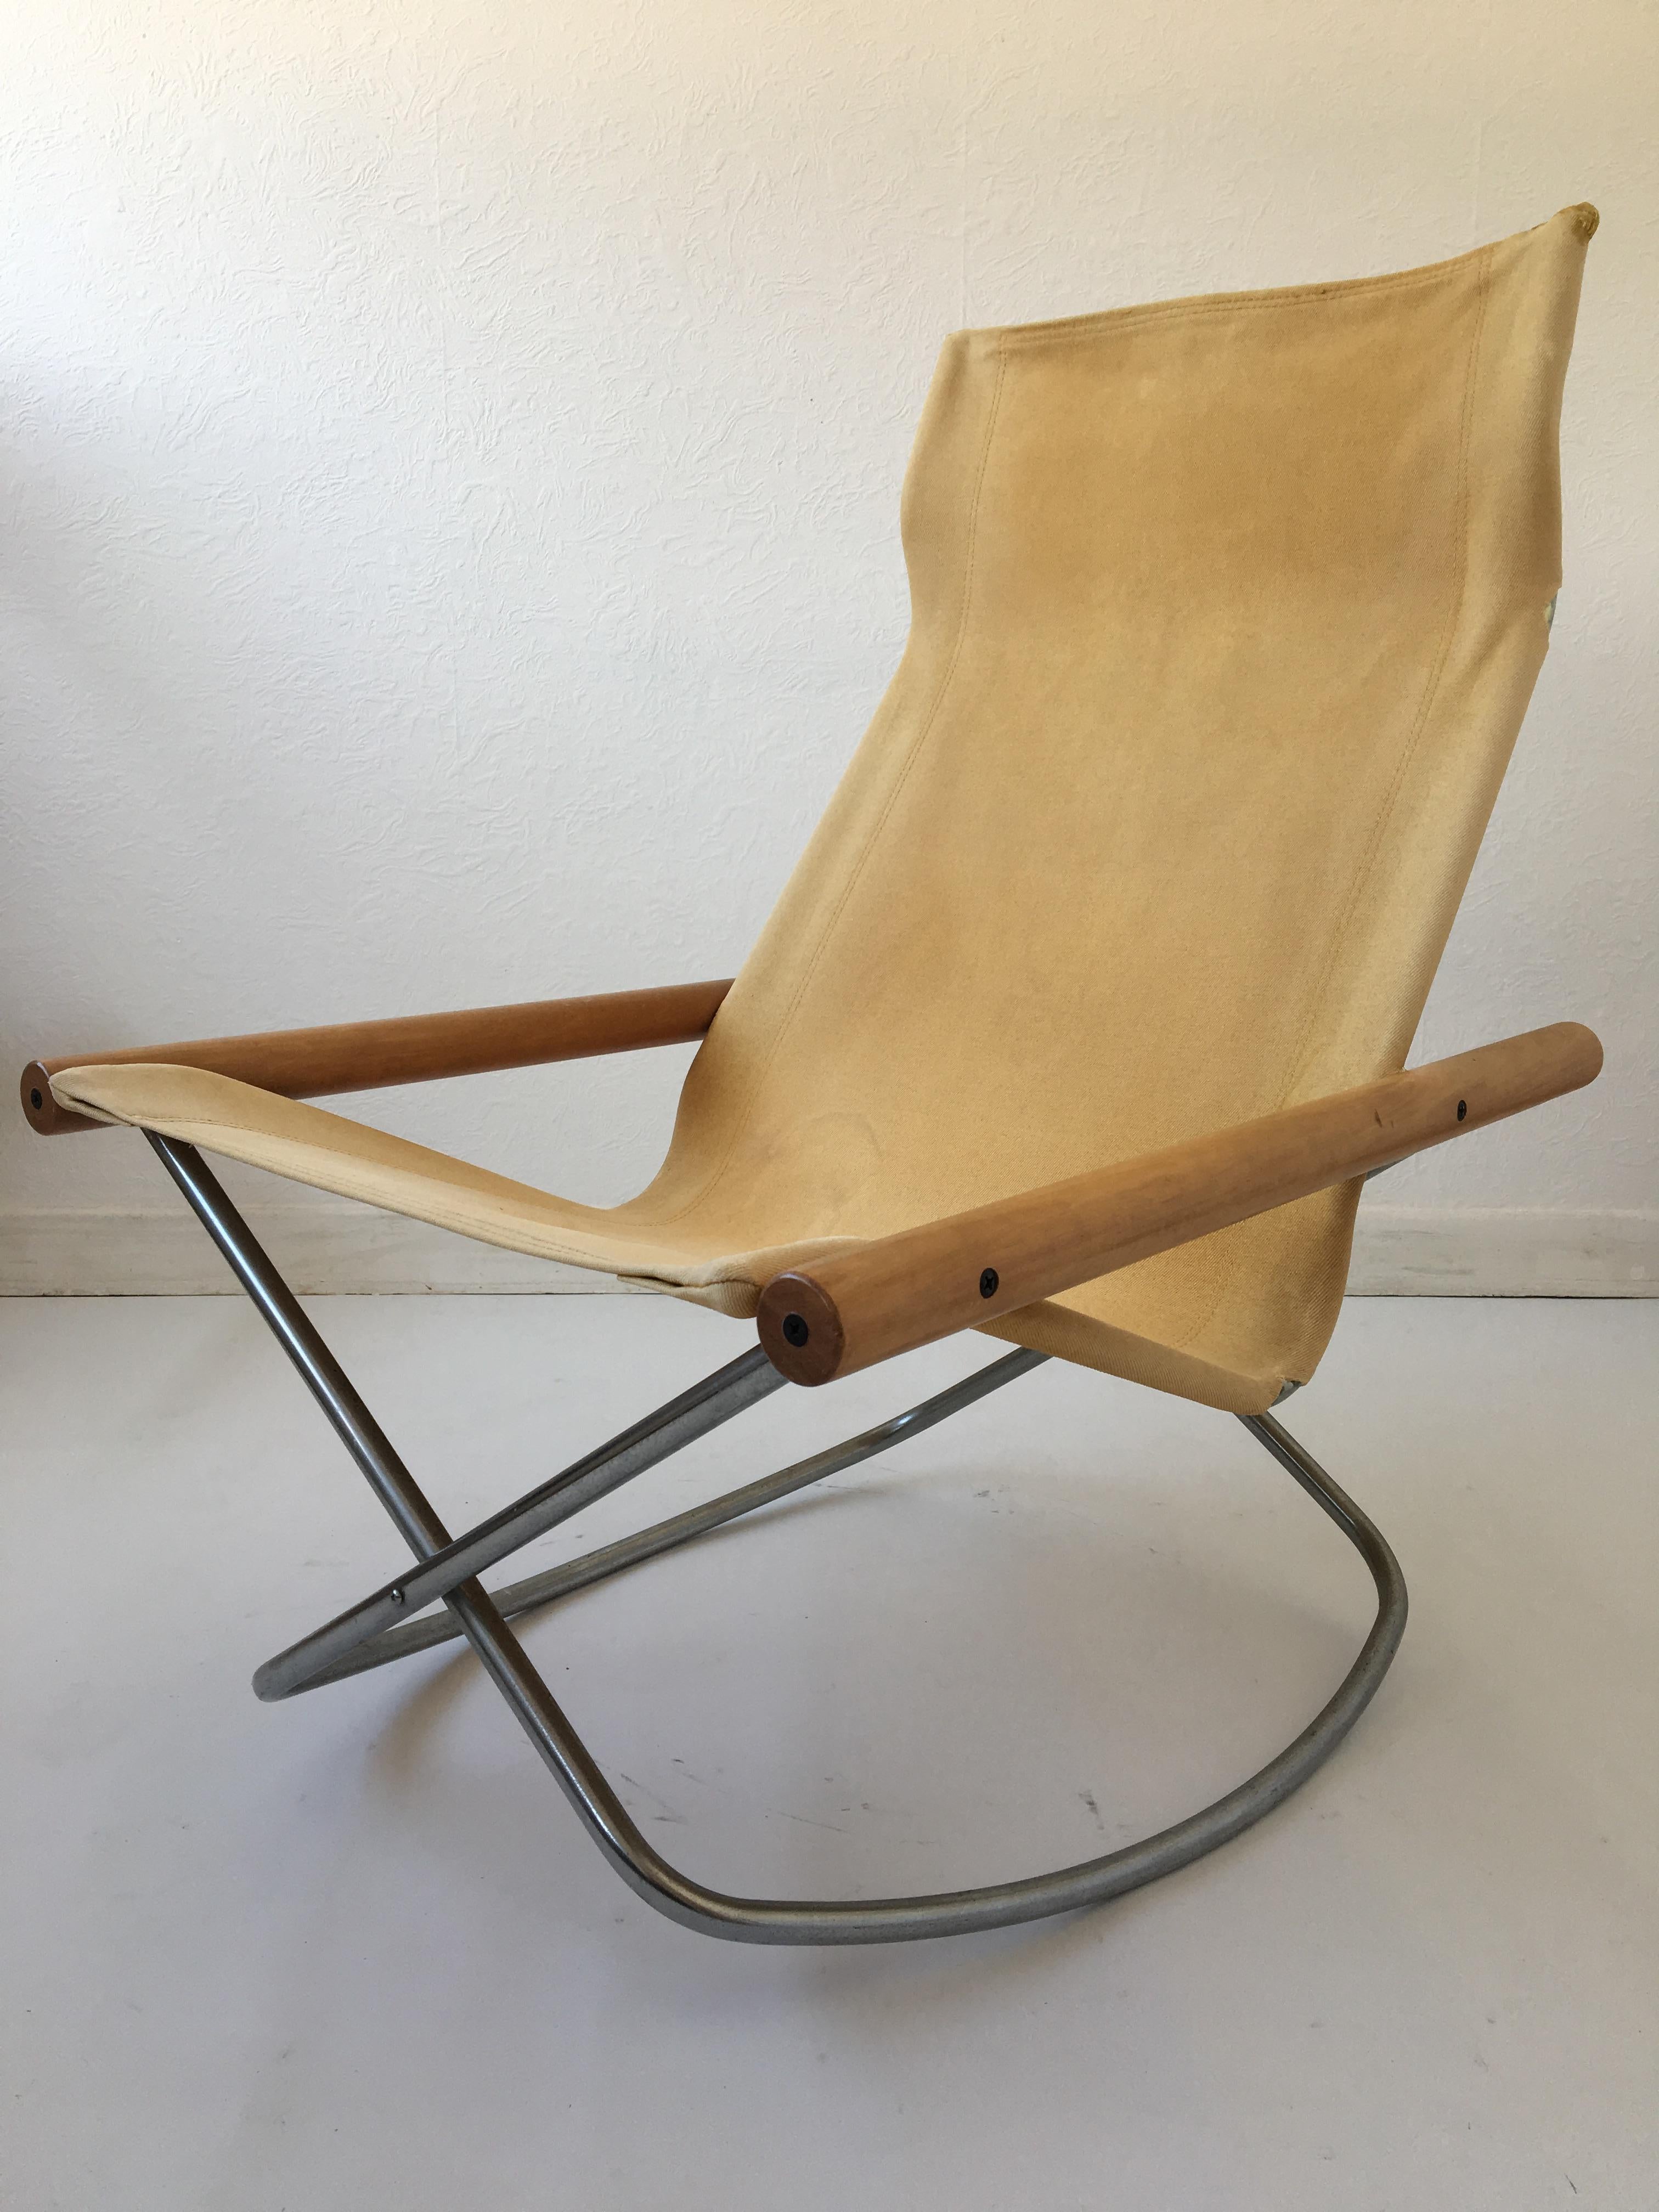 Midcentury Yellow Canvas 'NY' Chairs by Takeshi Nii, for Jox Interni, 1958 For Sale 3